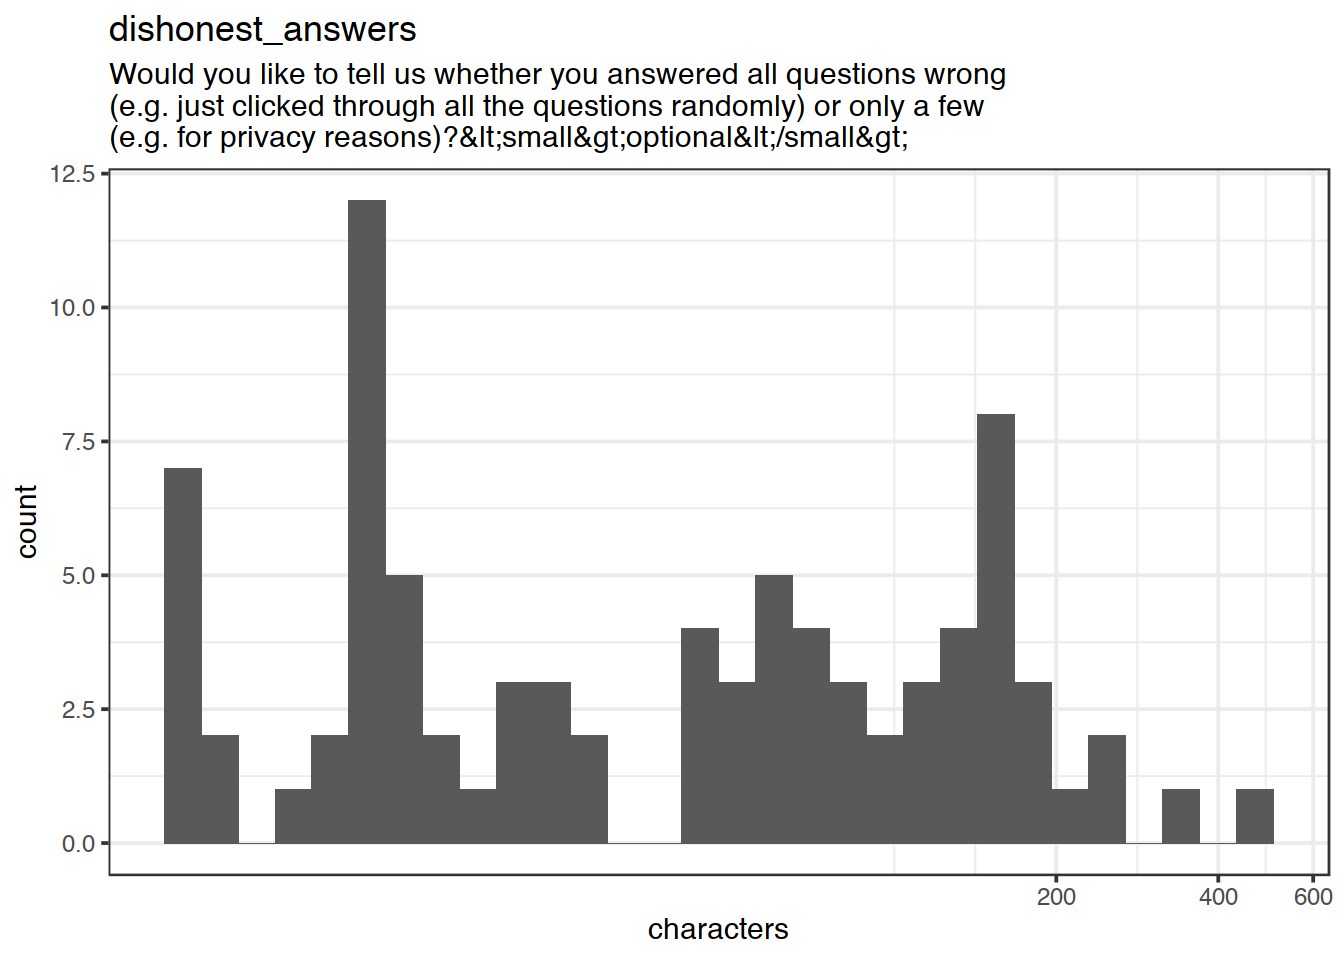 Distribution of values for dishonest_answers